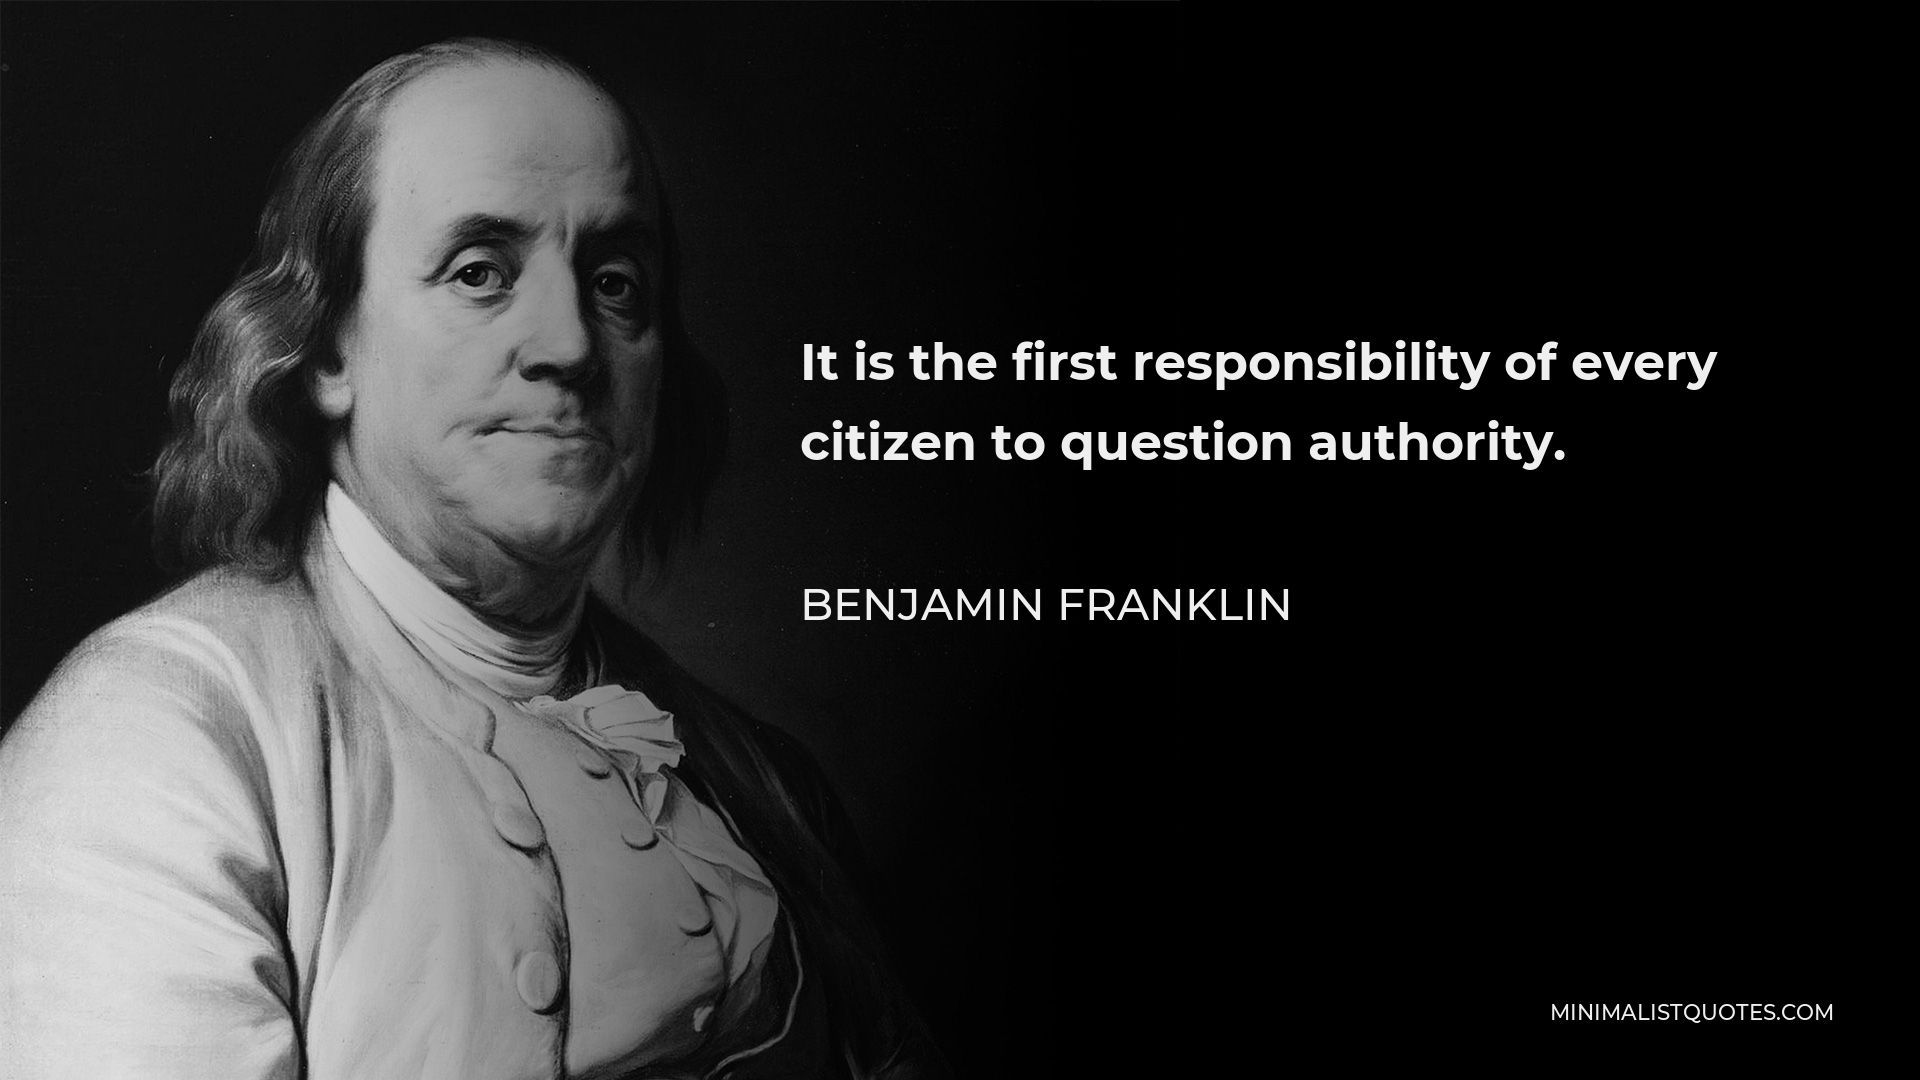 Benjamin Franklin Quote - It is the first responsibility of every citizen to question authority.